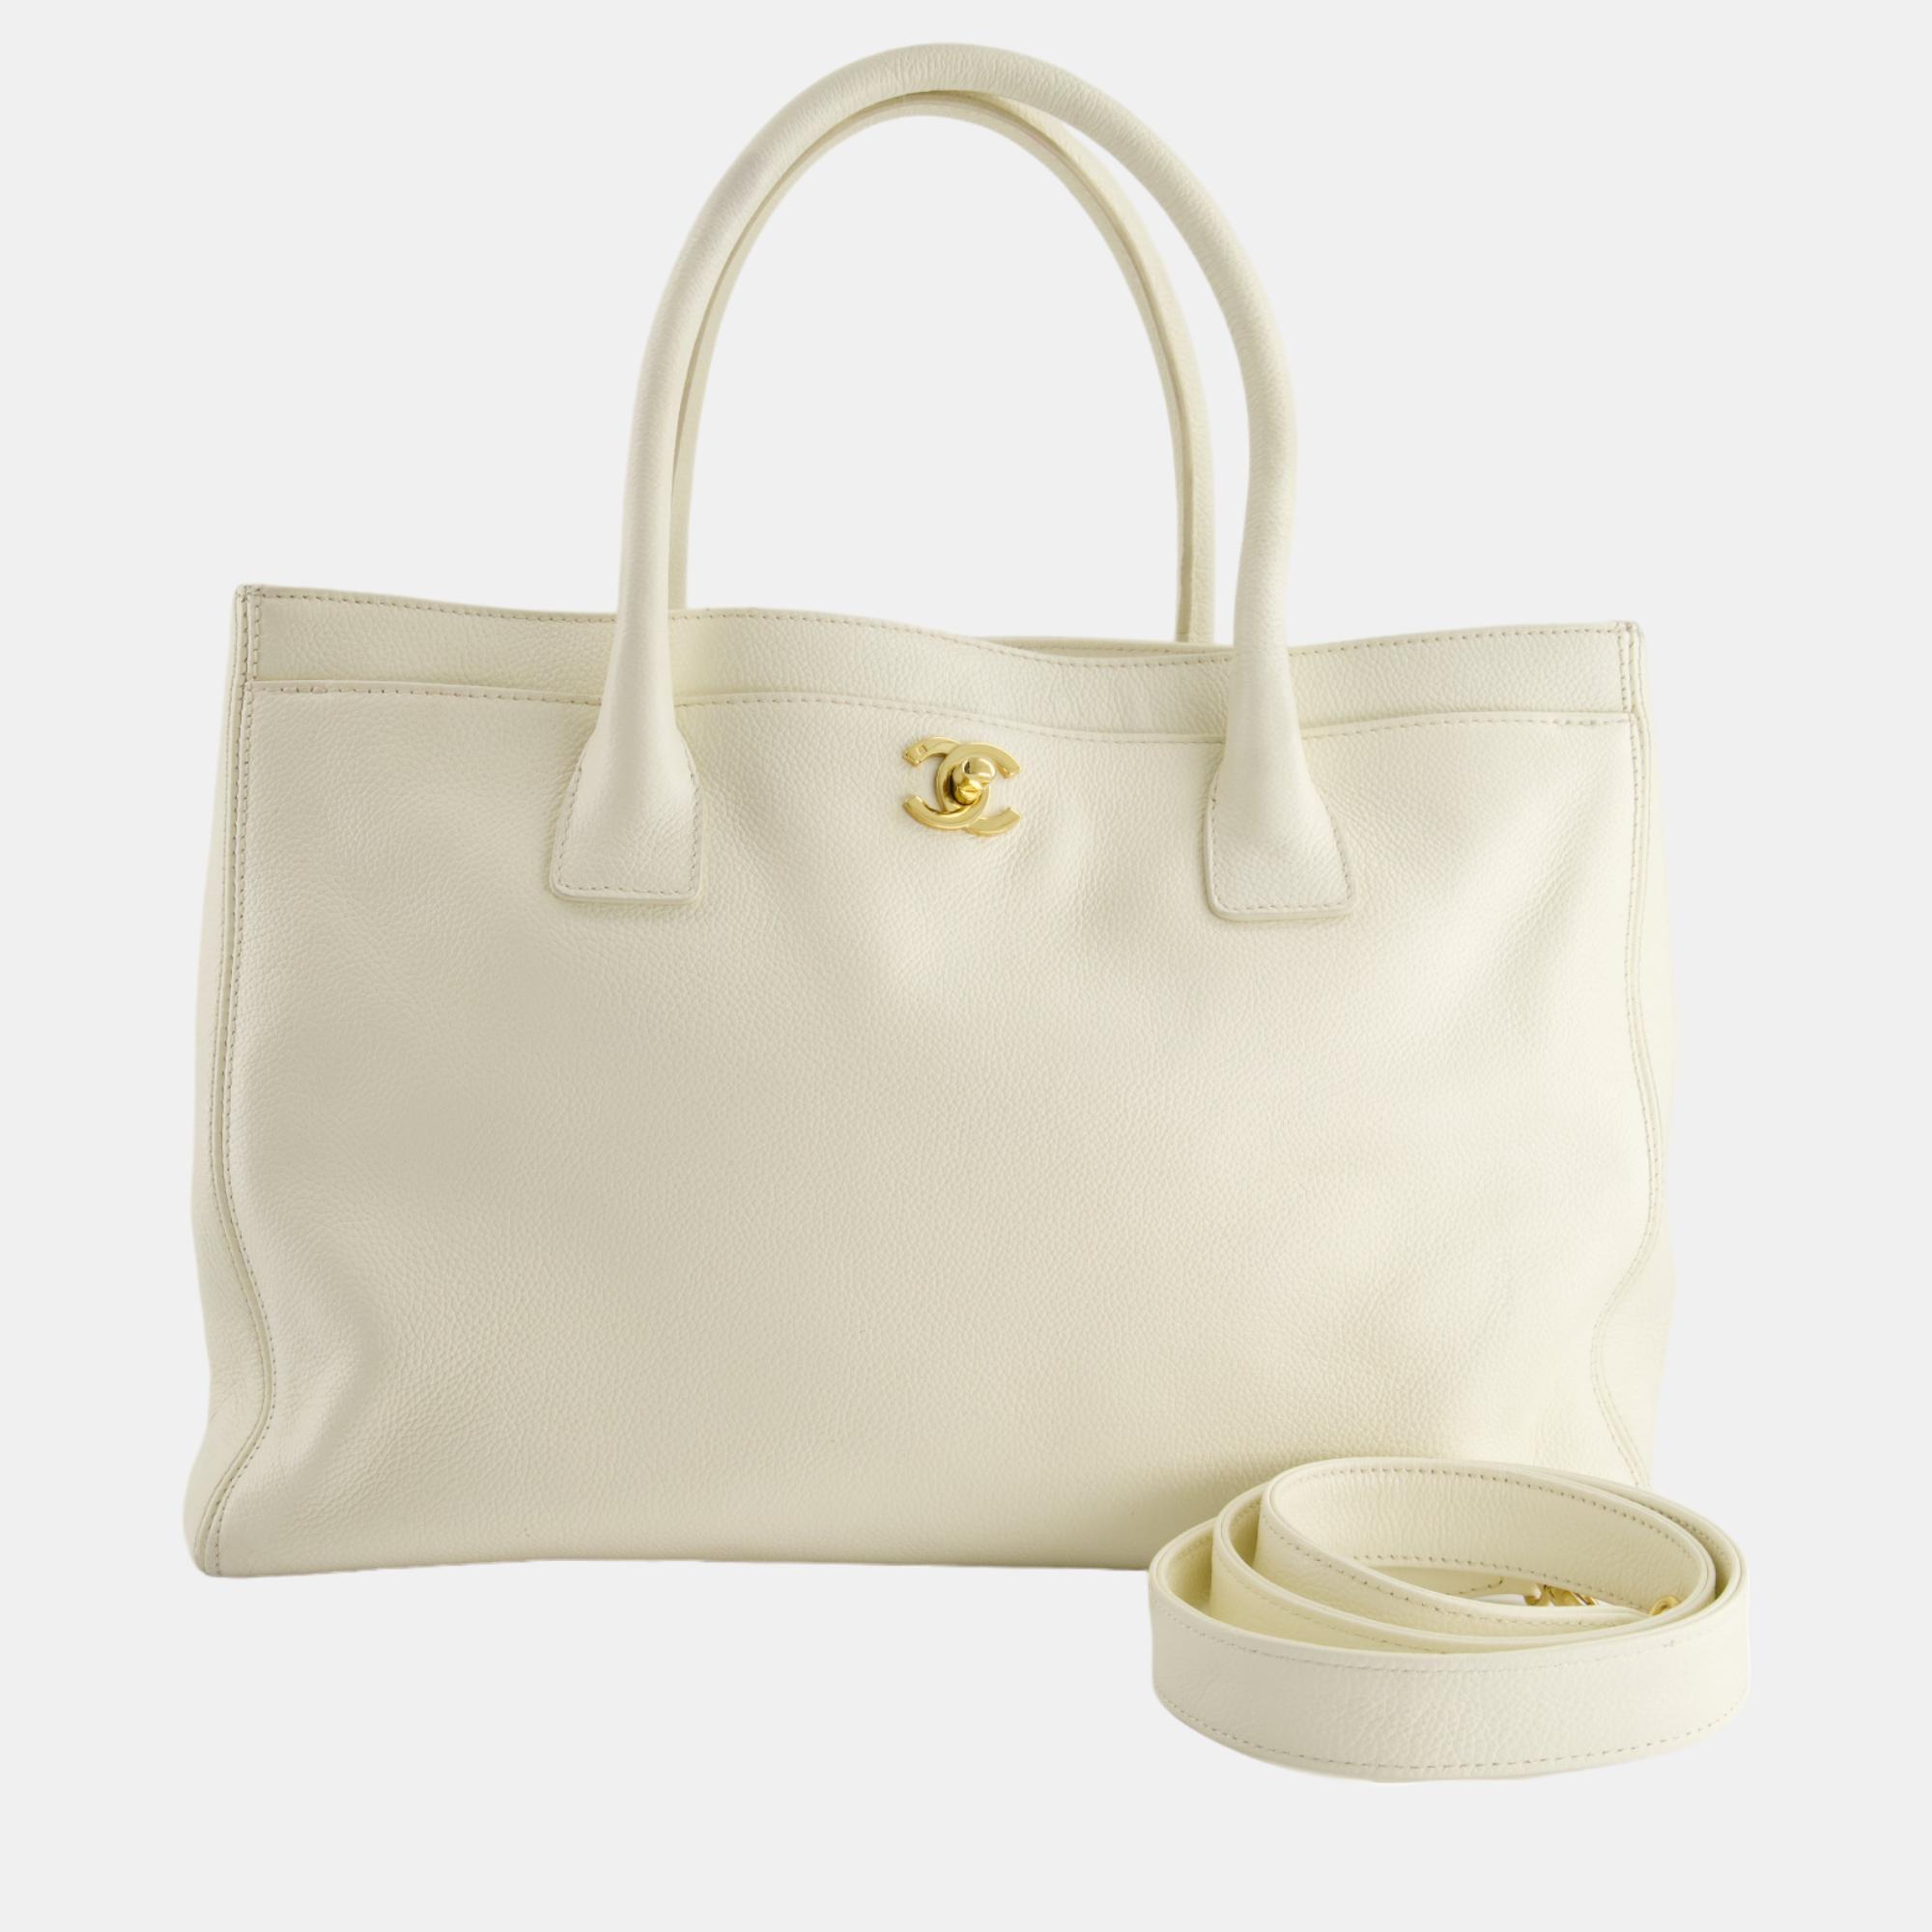 Chanel White Executive Shopper Tote Bag With Gold Hardware